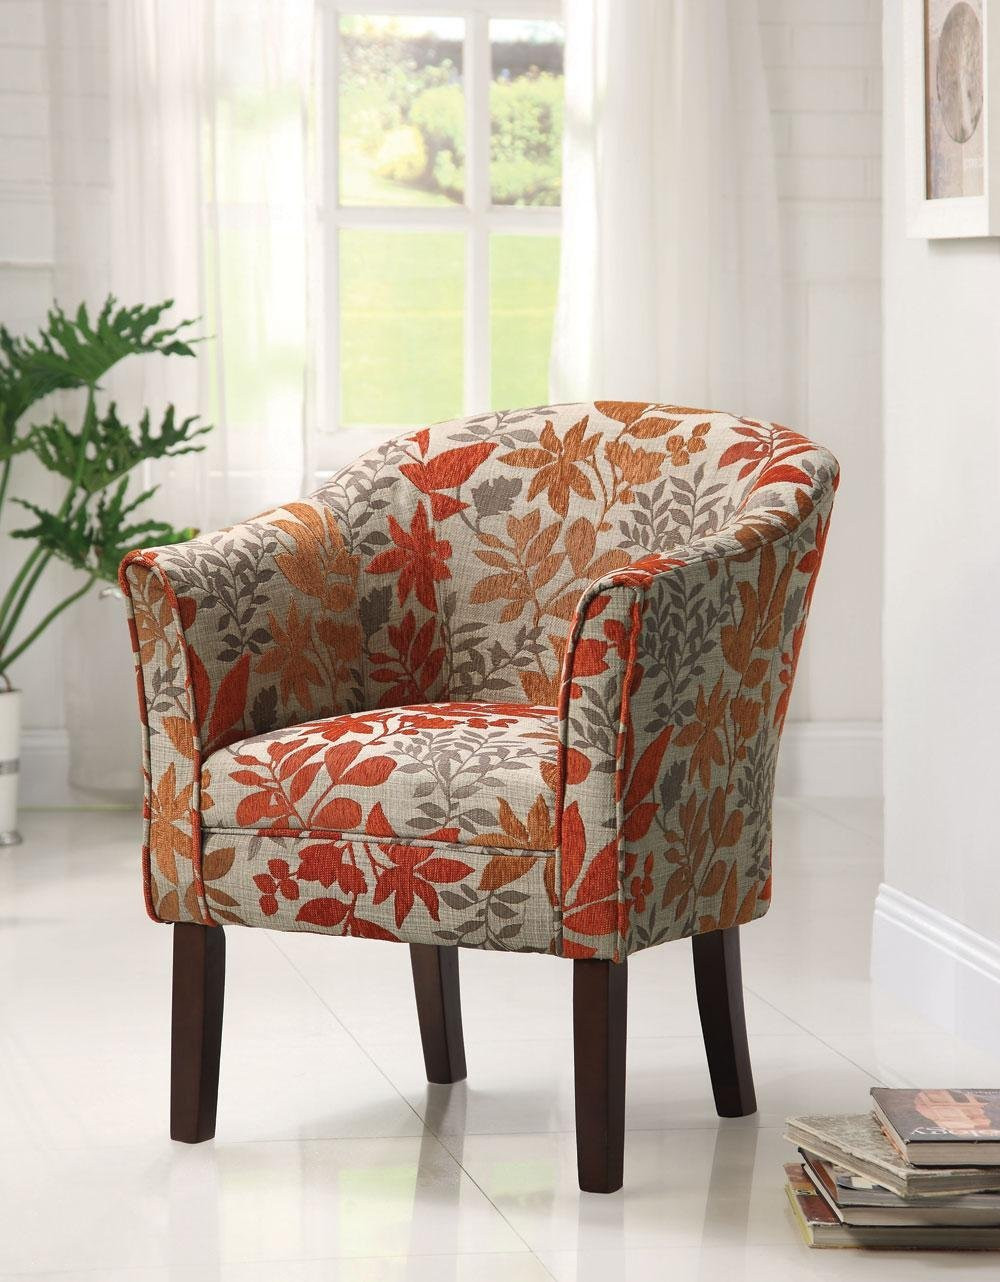 Best ideas about Living Room Chair
. Save or Pin Accent chairs for living room 23 reasons to Now.